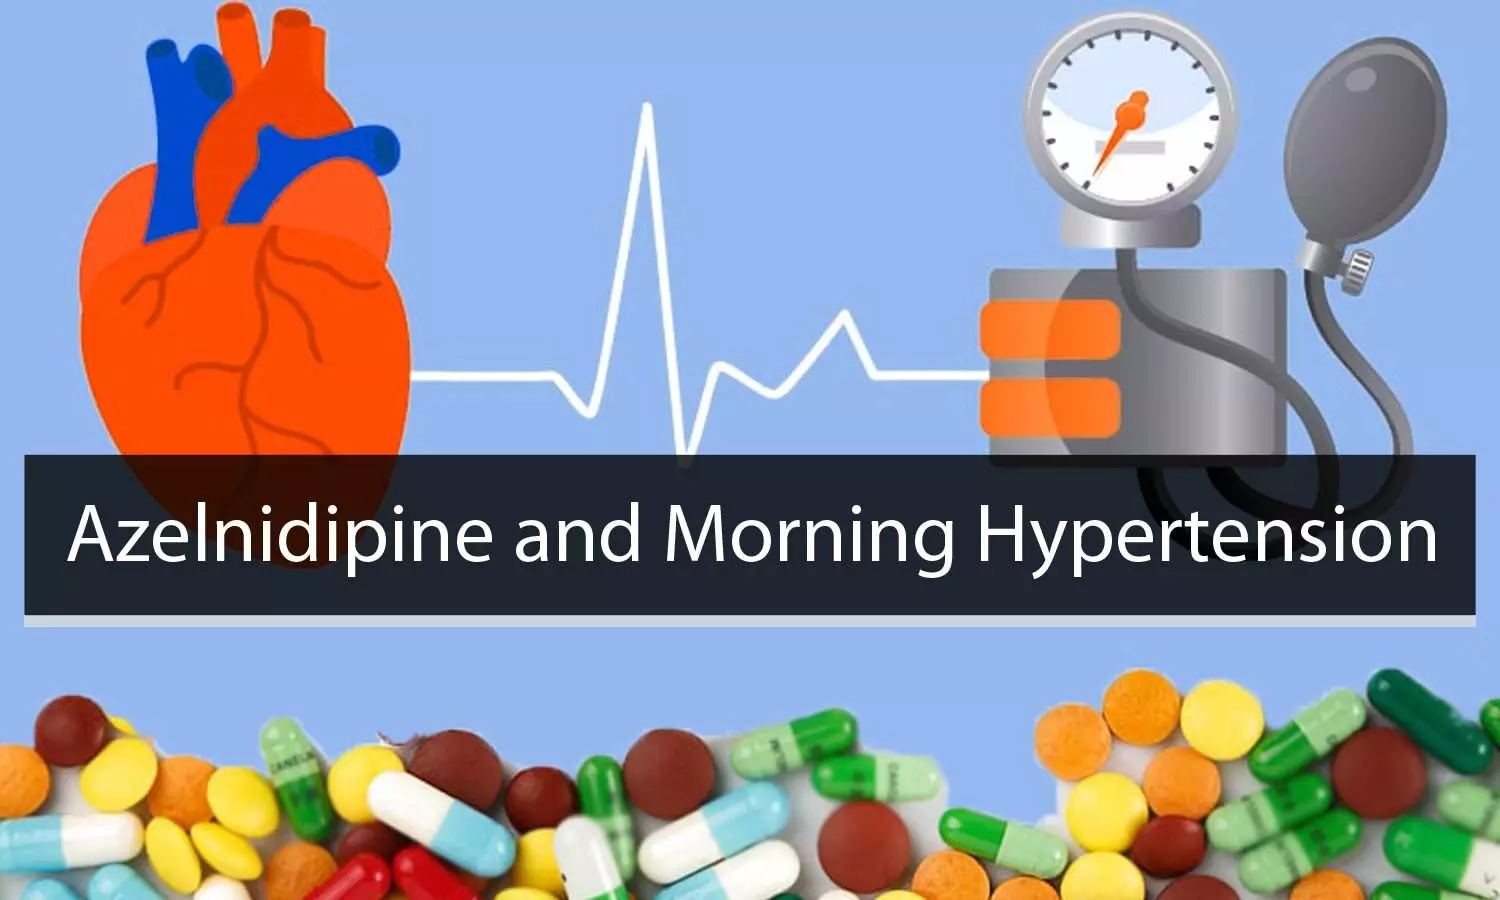 Controlling Morning Hypertension with Azelnidipine